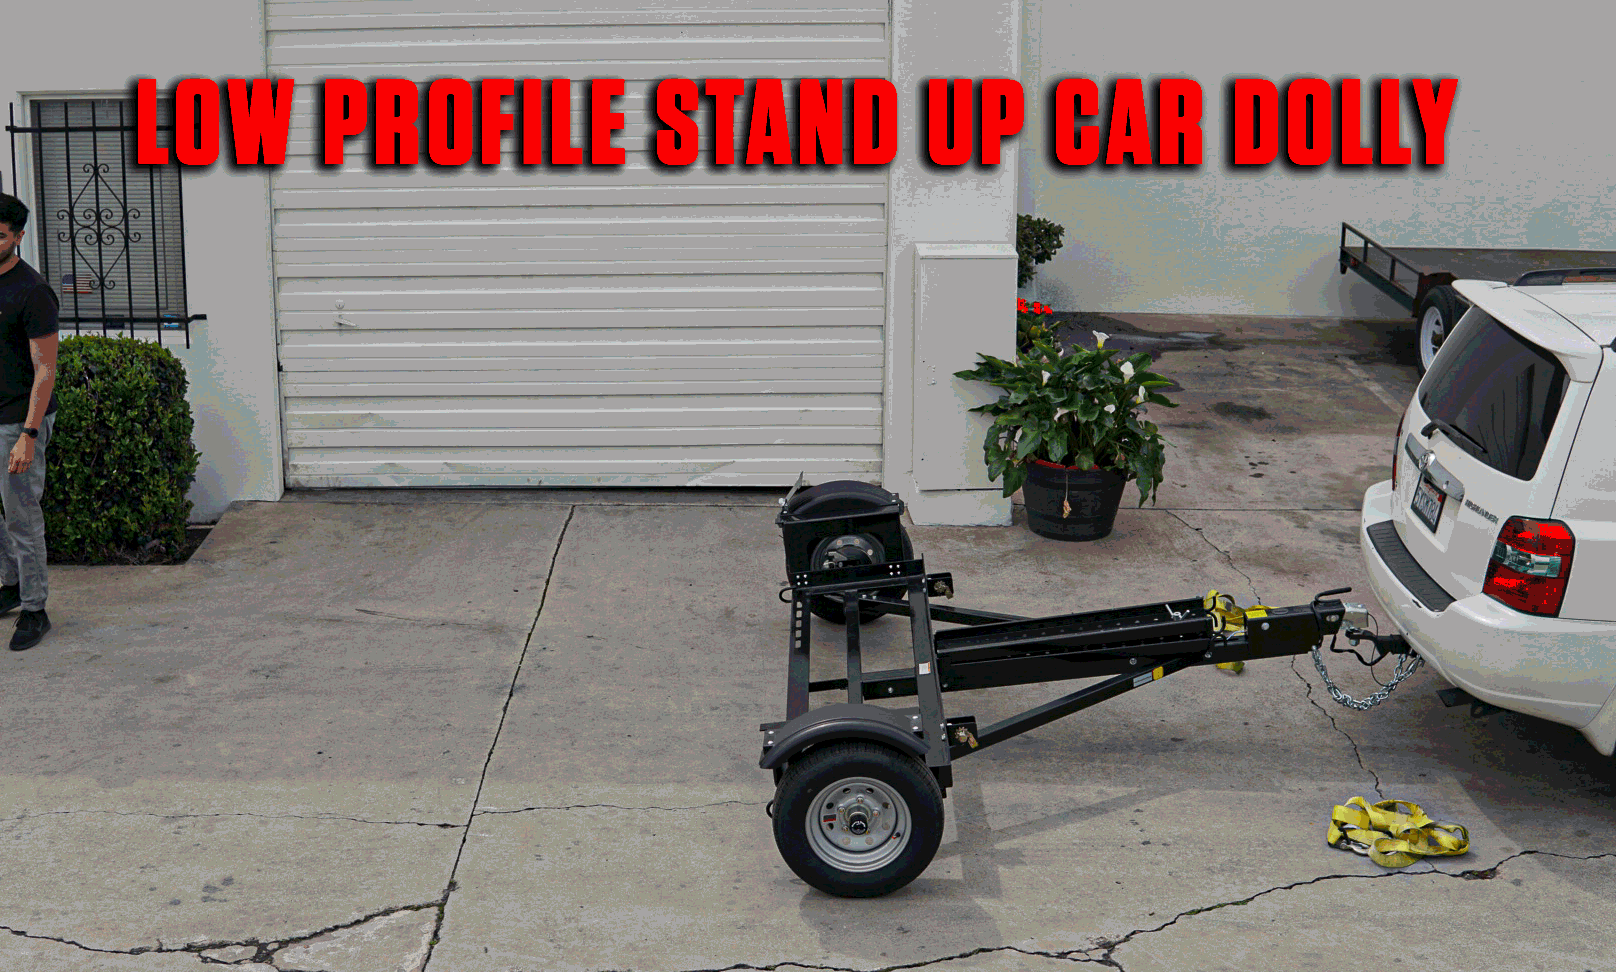 STAND UP CAR TOW DOLLY READY TO USE FOR SALE CHEAPEST MODEL TO PURCHASE